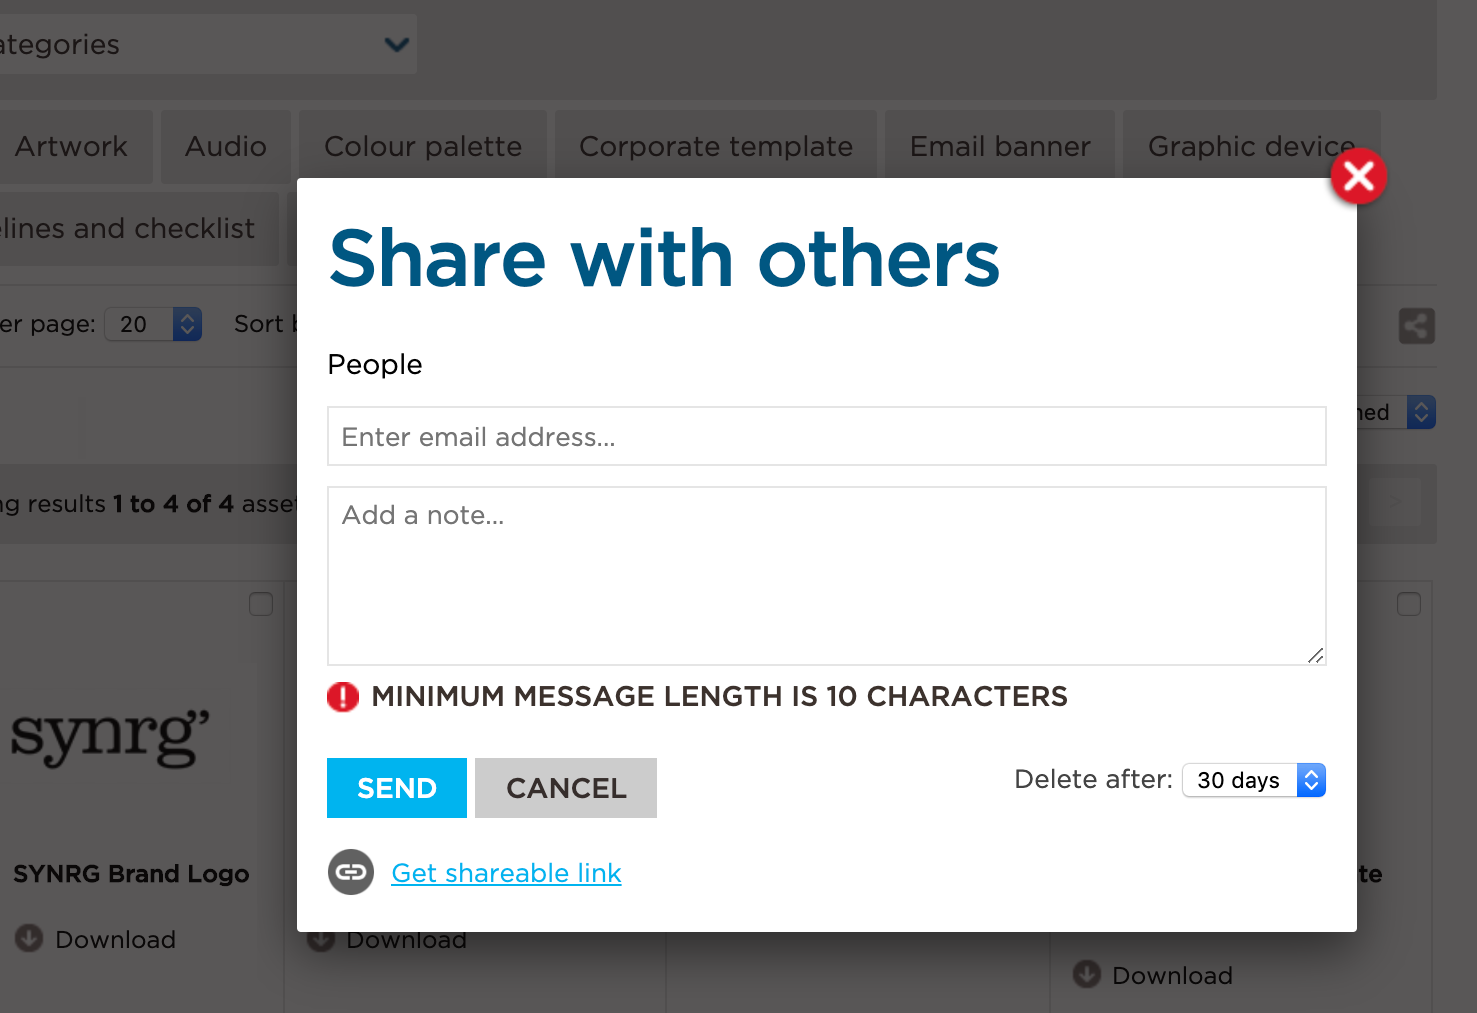 Share Assets With Others Dialog Box Crop